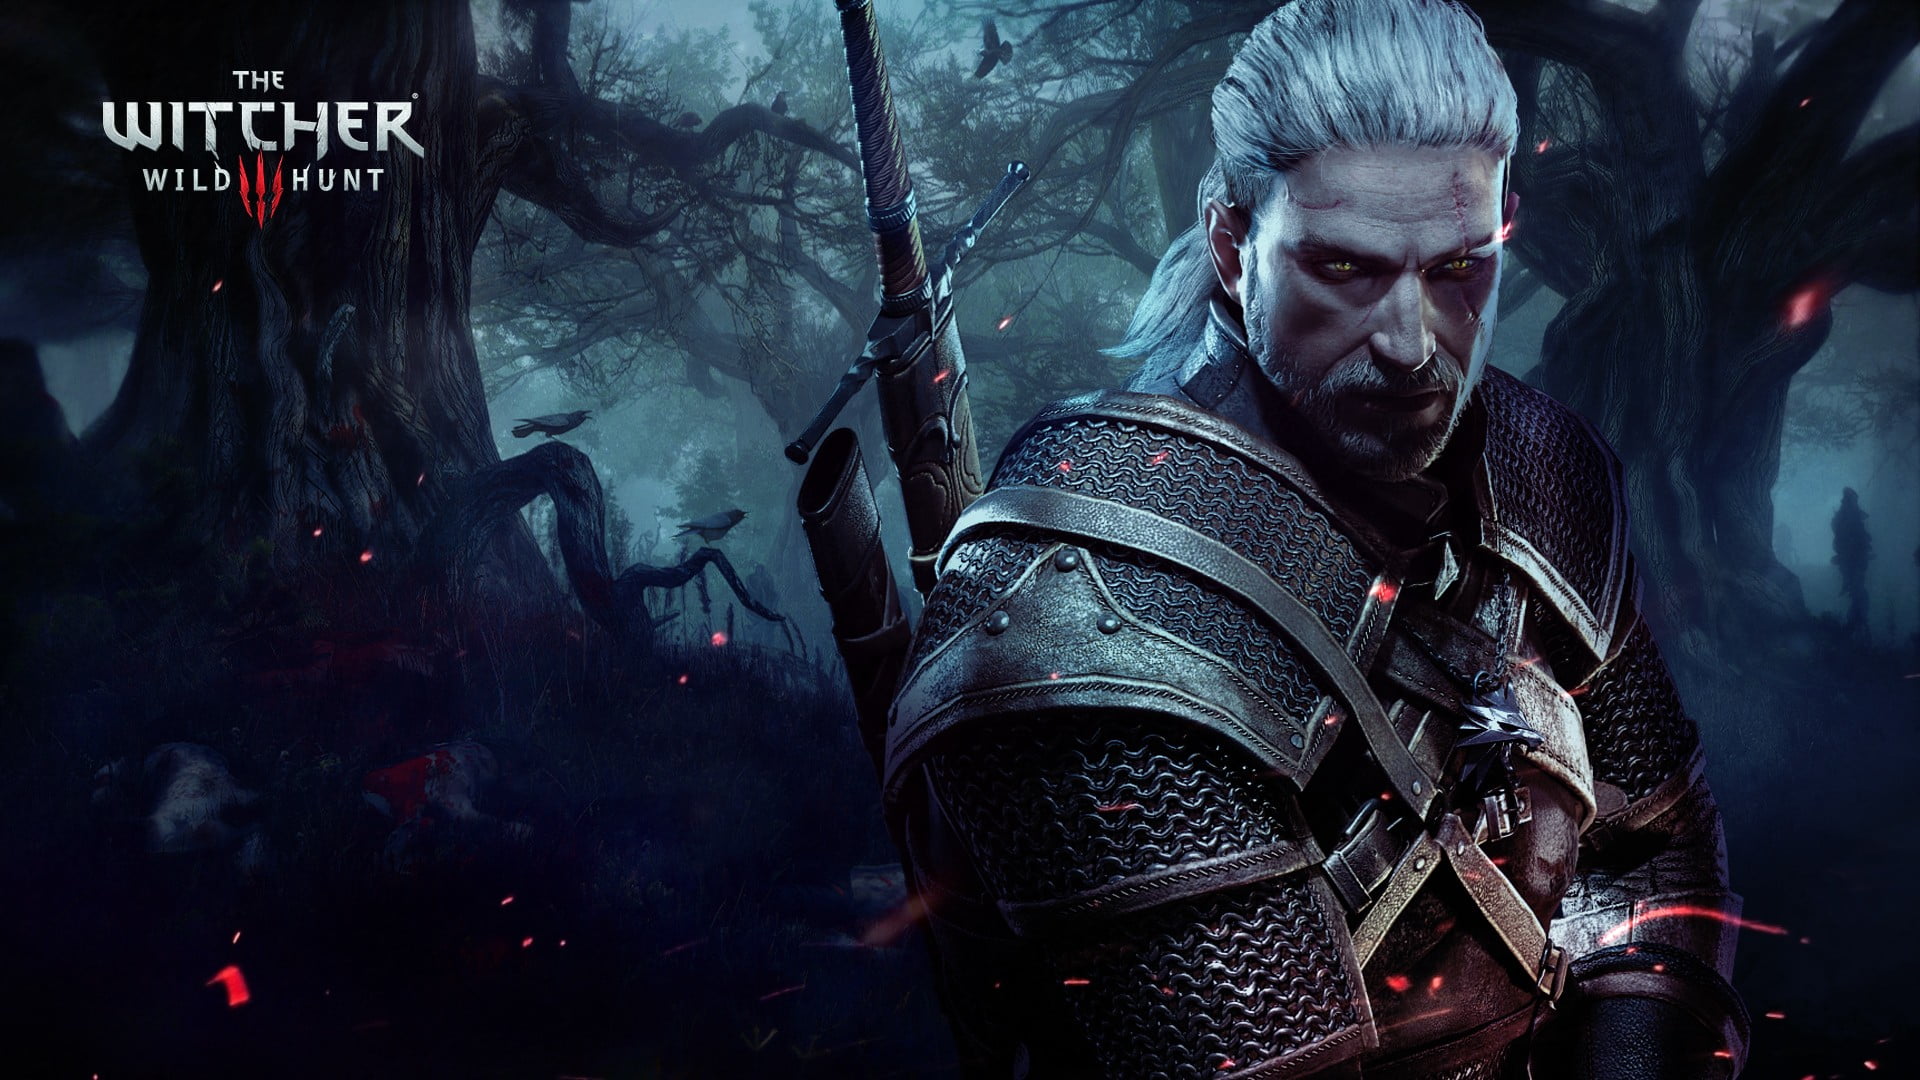 The Witcher Wild Hunt Poster The Witcher 3 Wild Hunt Video Games Geralt Of Rivia Hd Wallpaper Wallpaper Flare